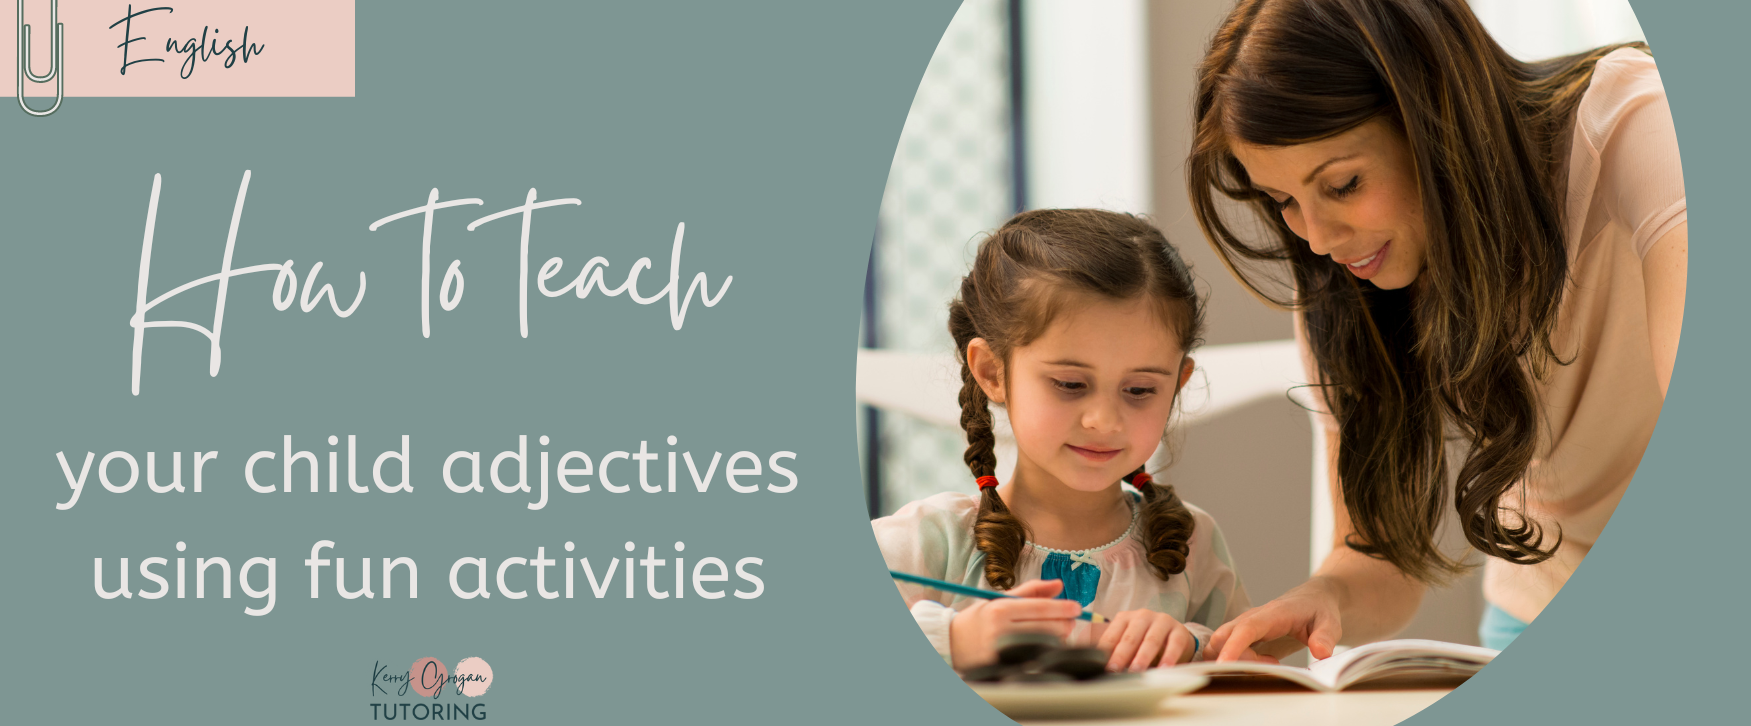 How to teach your child adjective and examples using fun activities